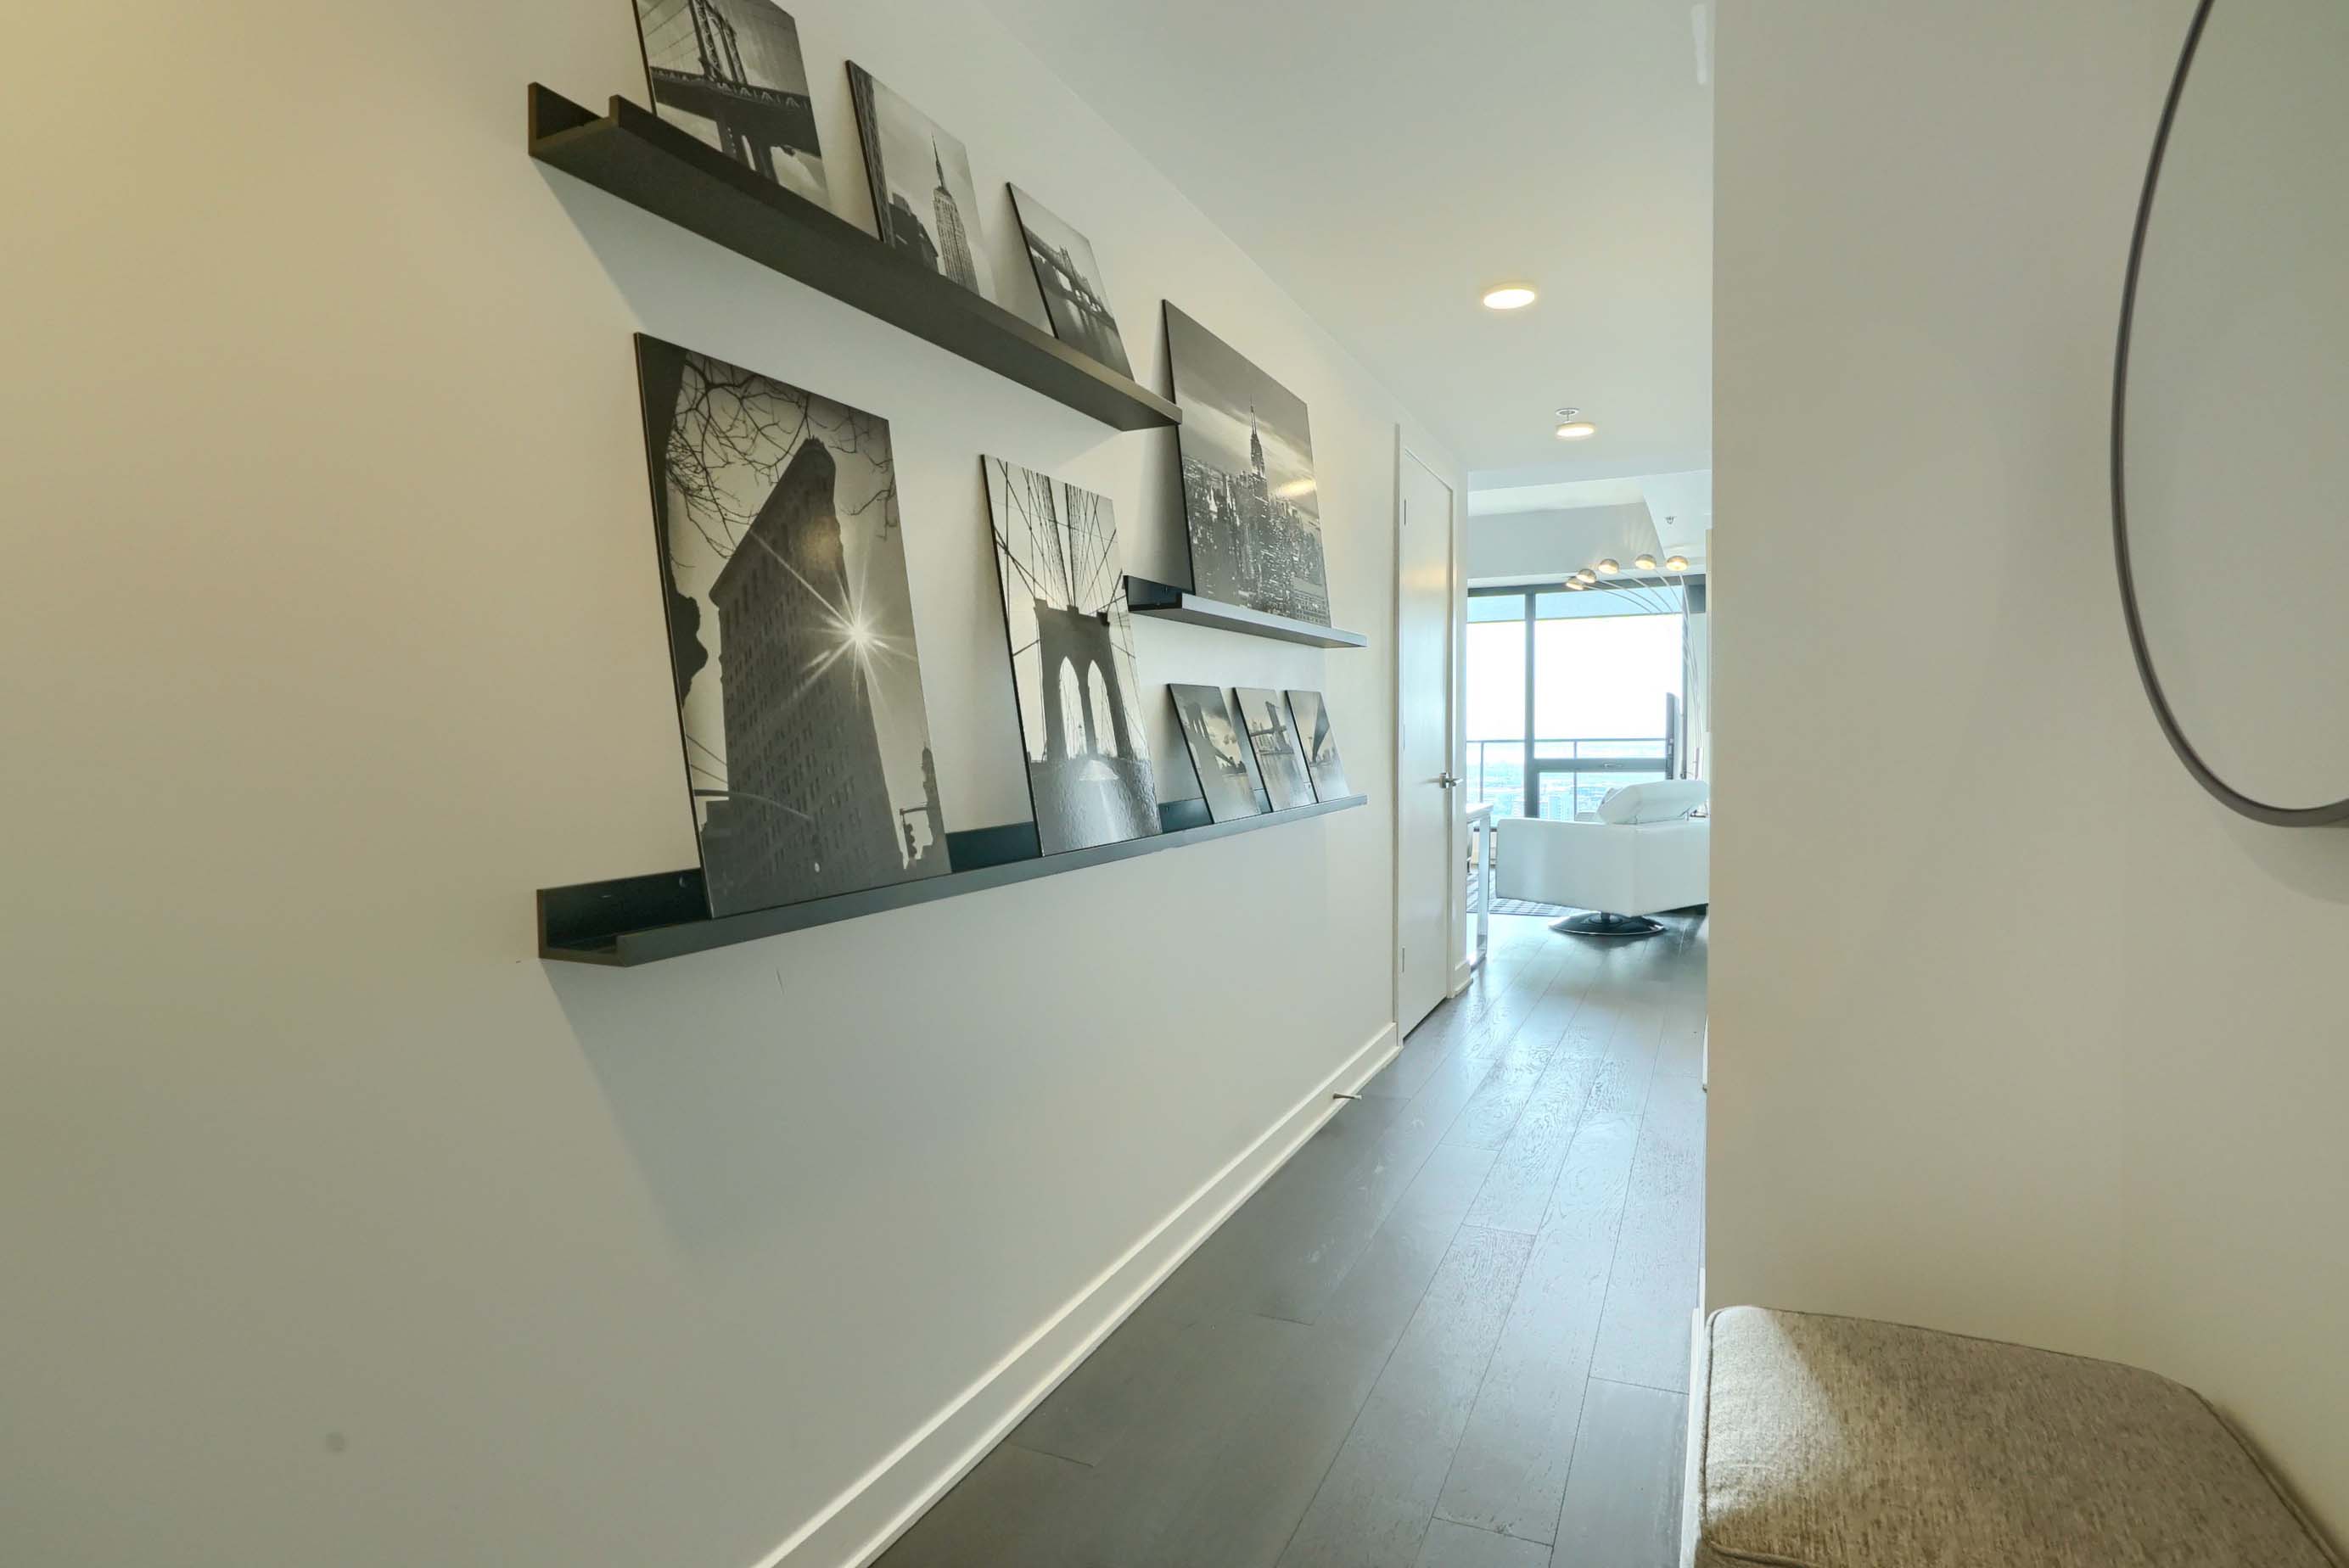 View of the hall from the door leading into this luxury furnished condo for rent in montreal. Designer accent wall with stunning photography and overhead lighting